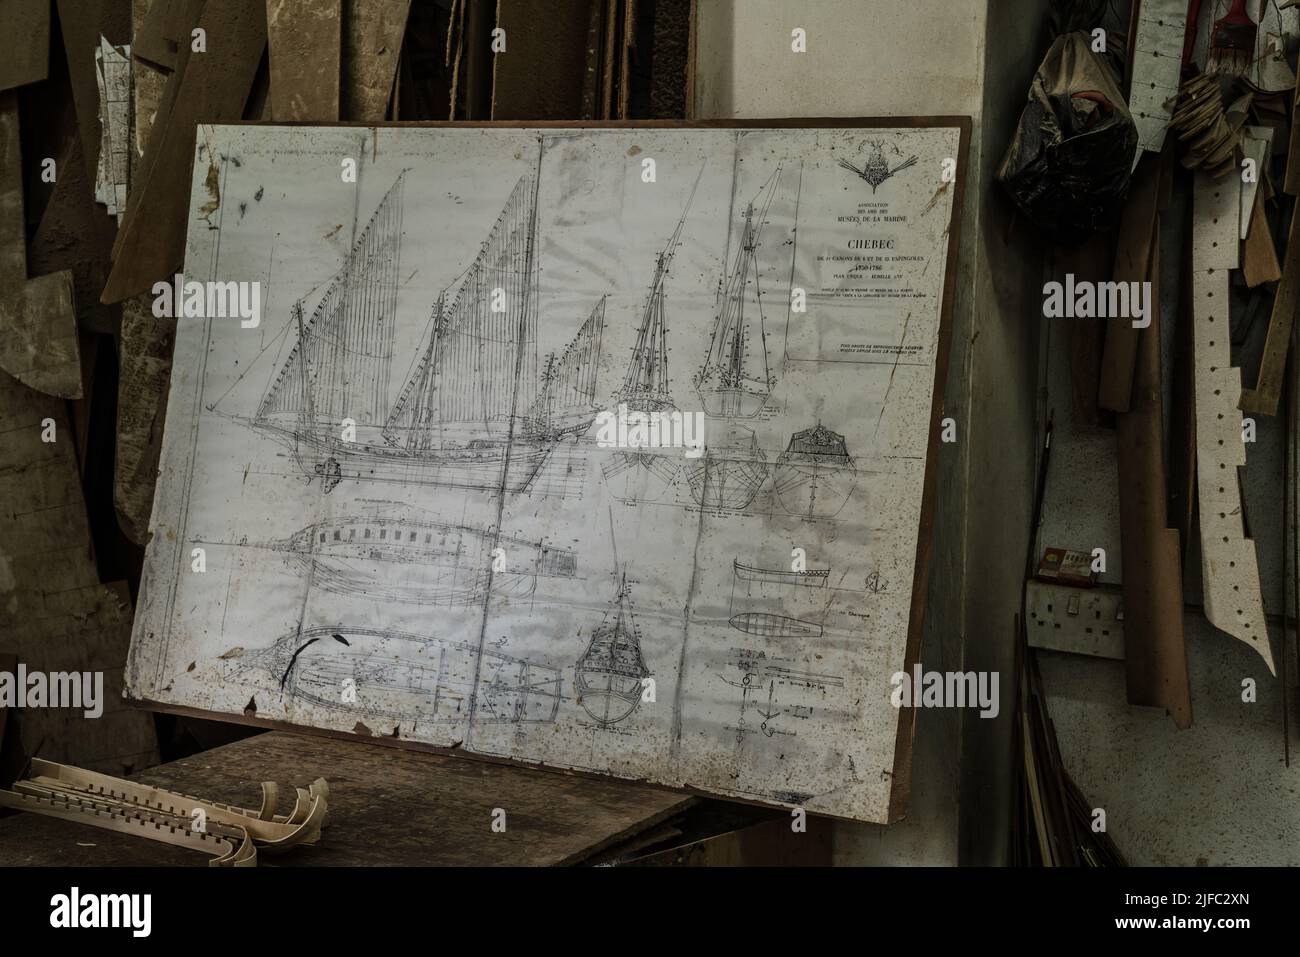 Old sailboat, compass and ancient map historical background. A concept on the topic of sea voyages, discoveries, pirates, sailors and history. Stock Photo